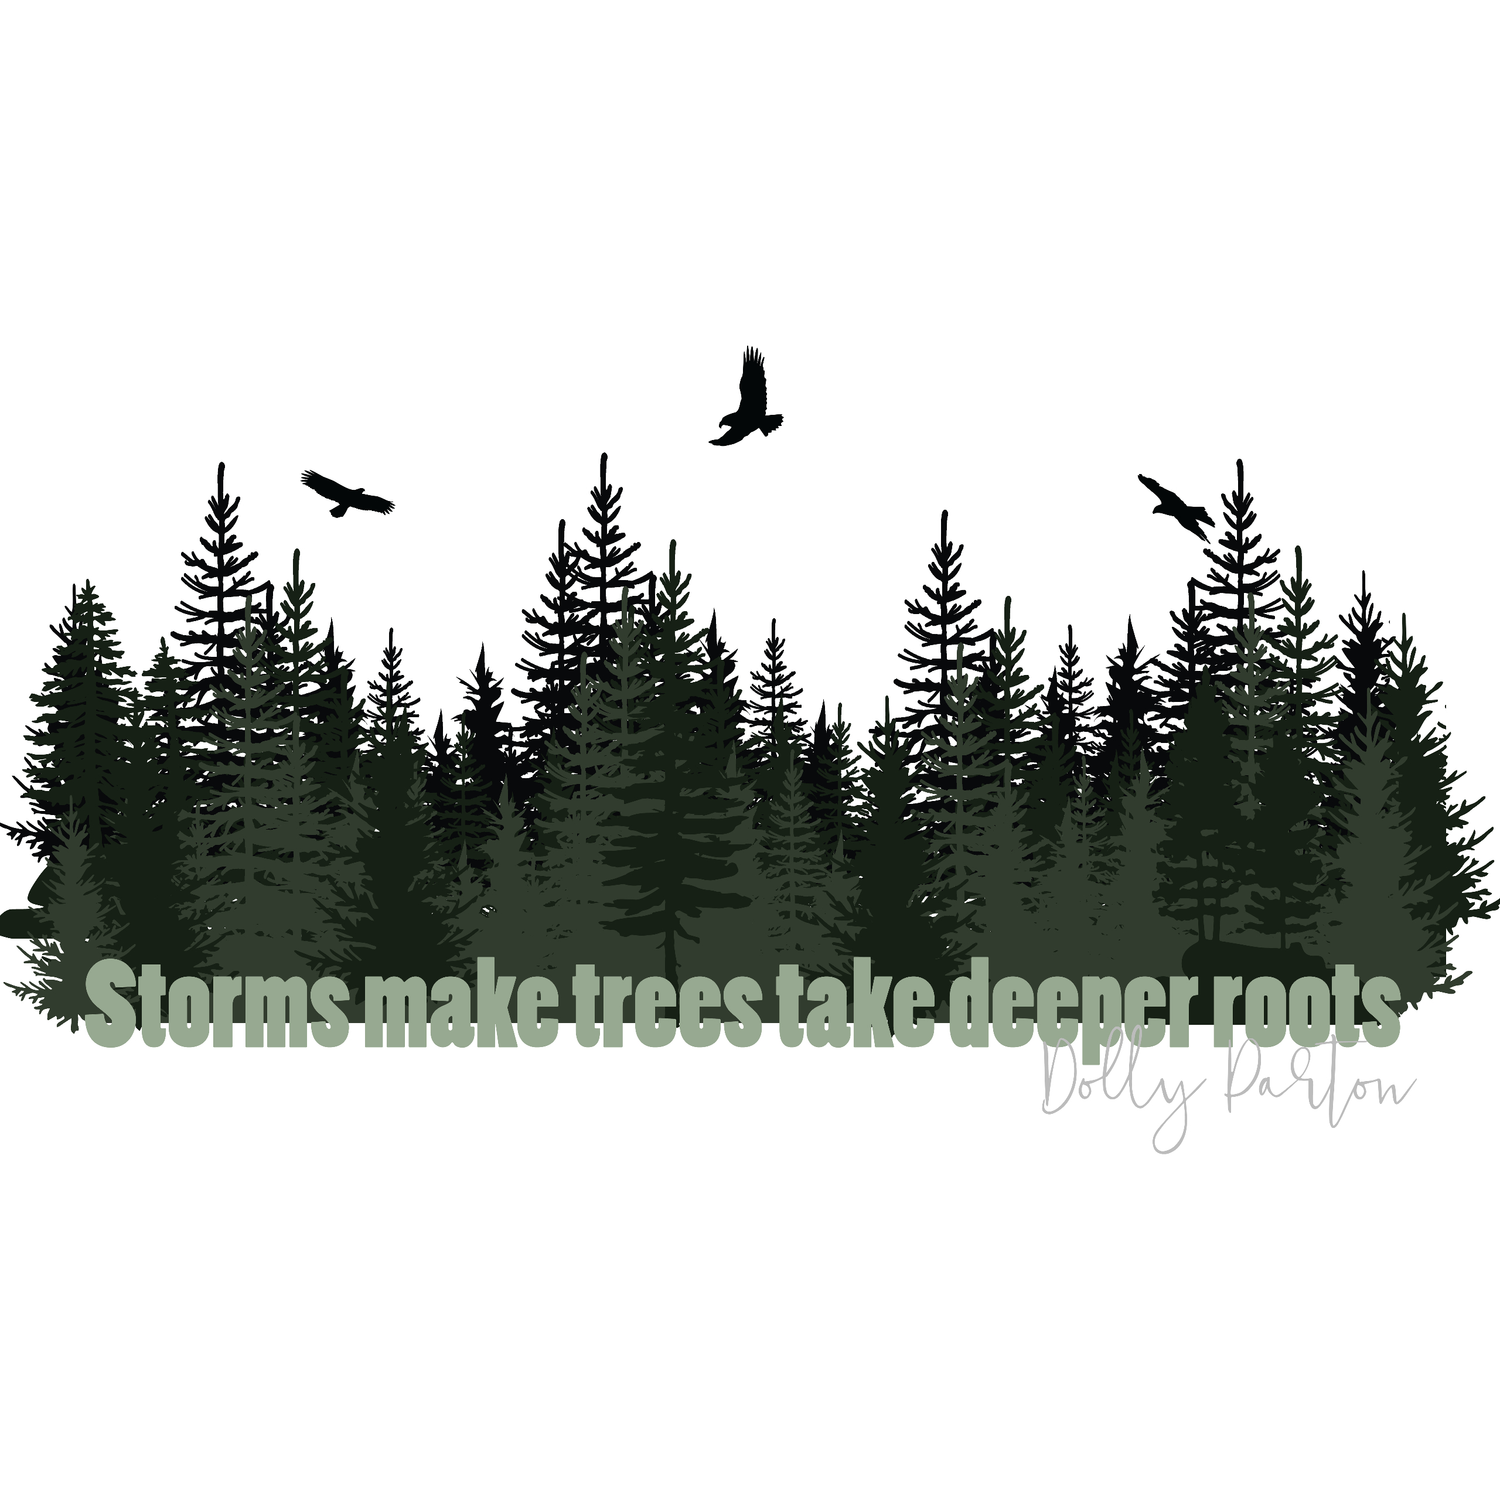 forrest scene with birds flying overhead with quote "Storms make trees take deeper roots" Dolly Parton